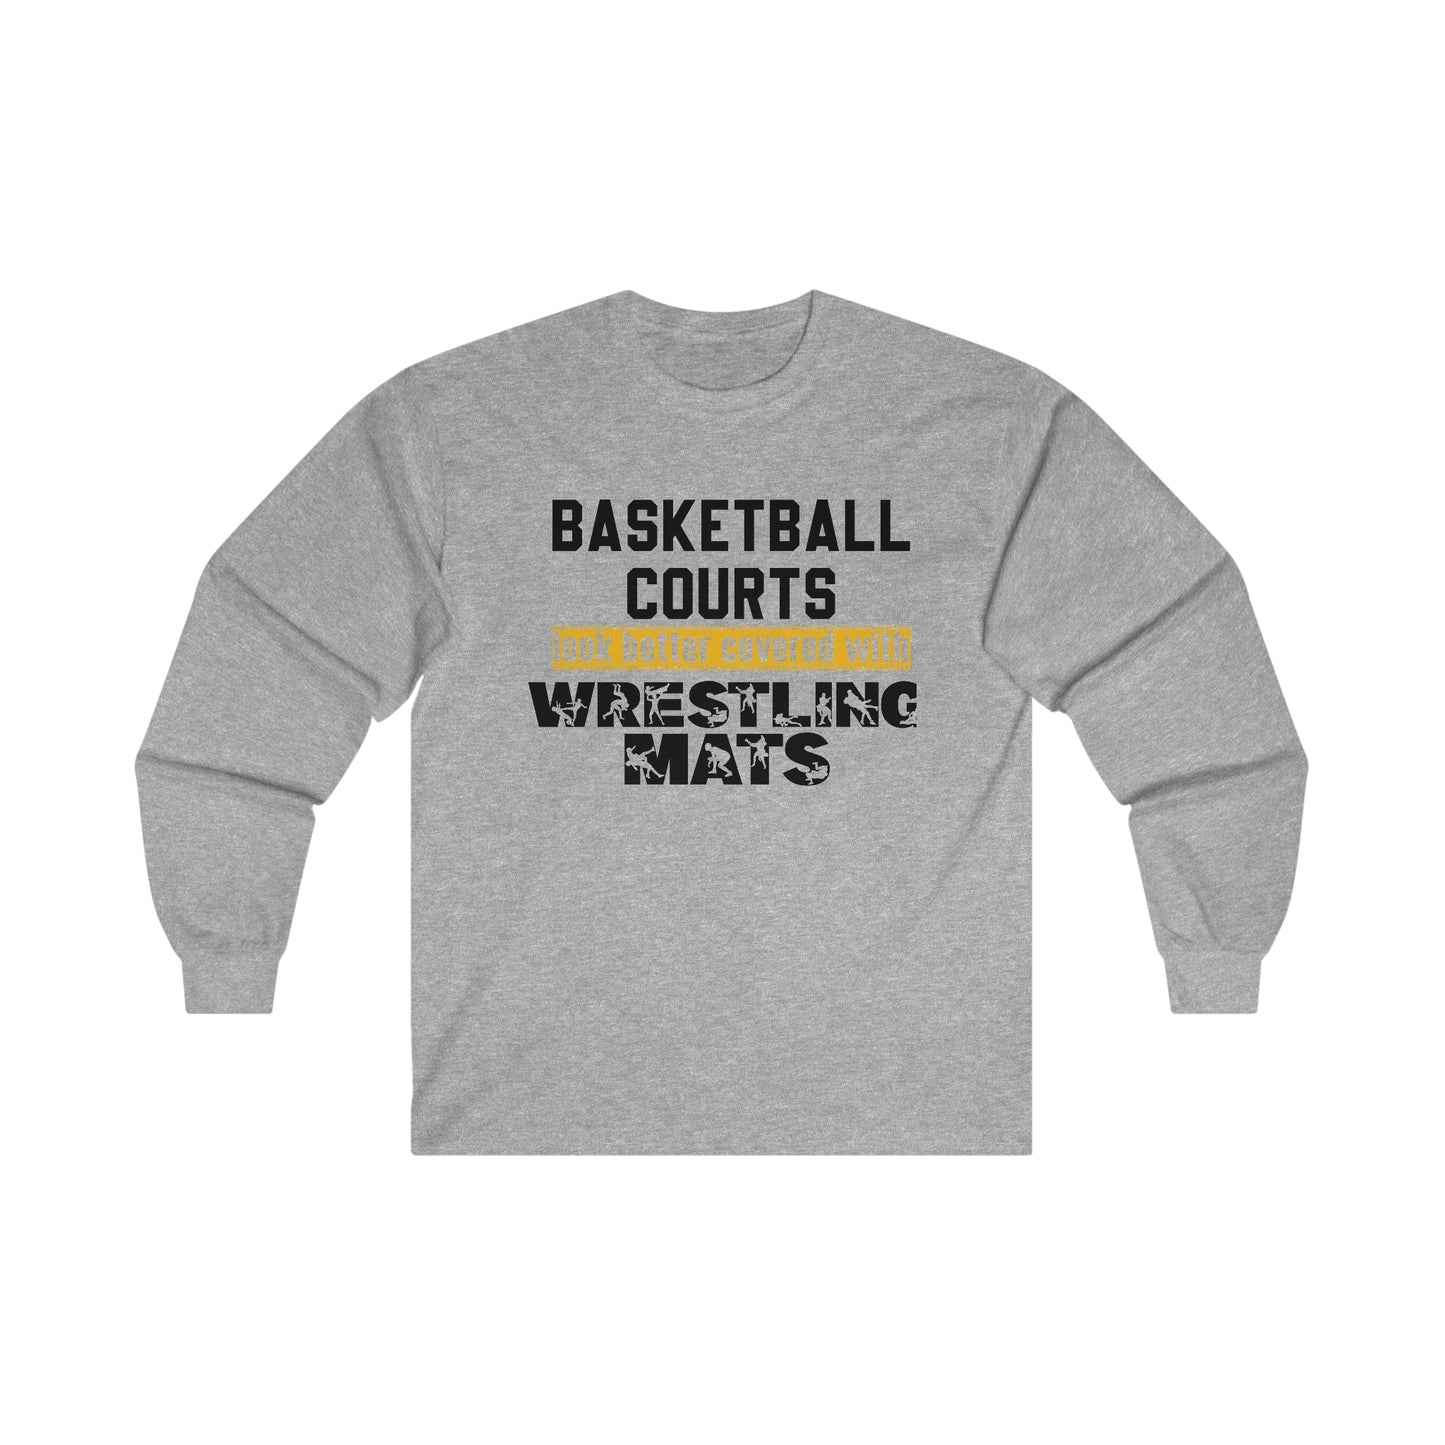 Basketball Courts Look Better Covered With Wrestling Mats: Ultra Cotton Long Sleeve Tee